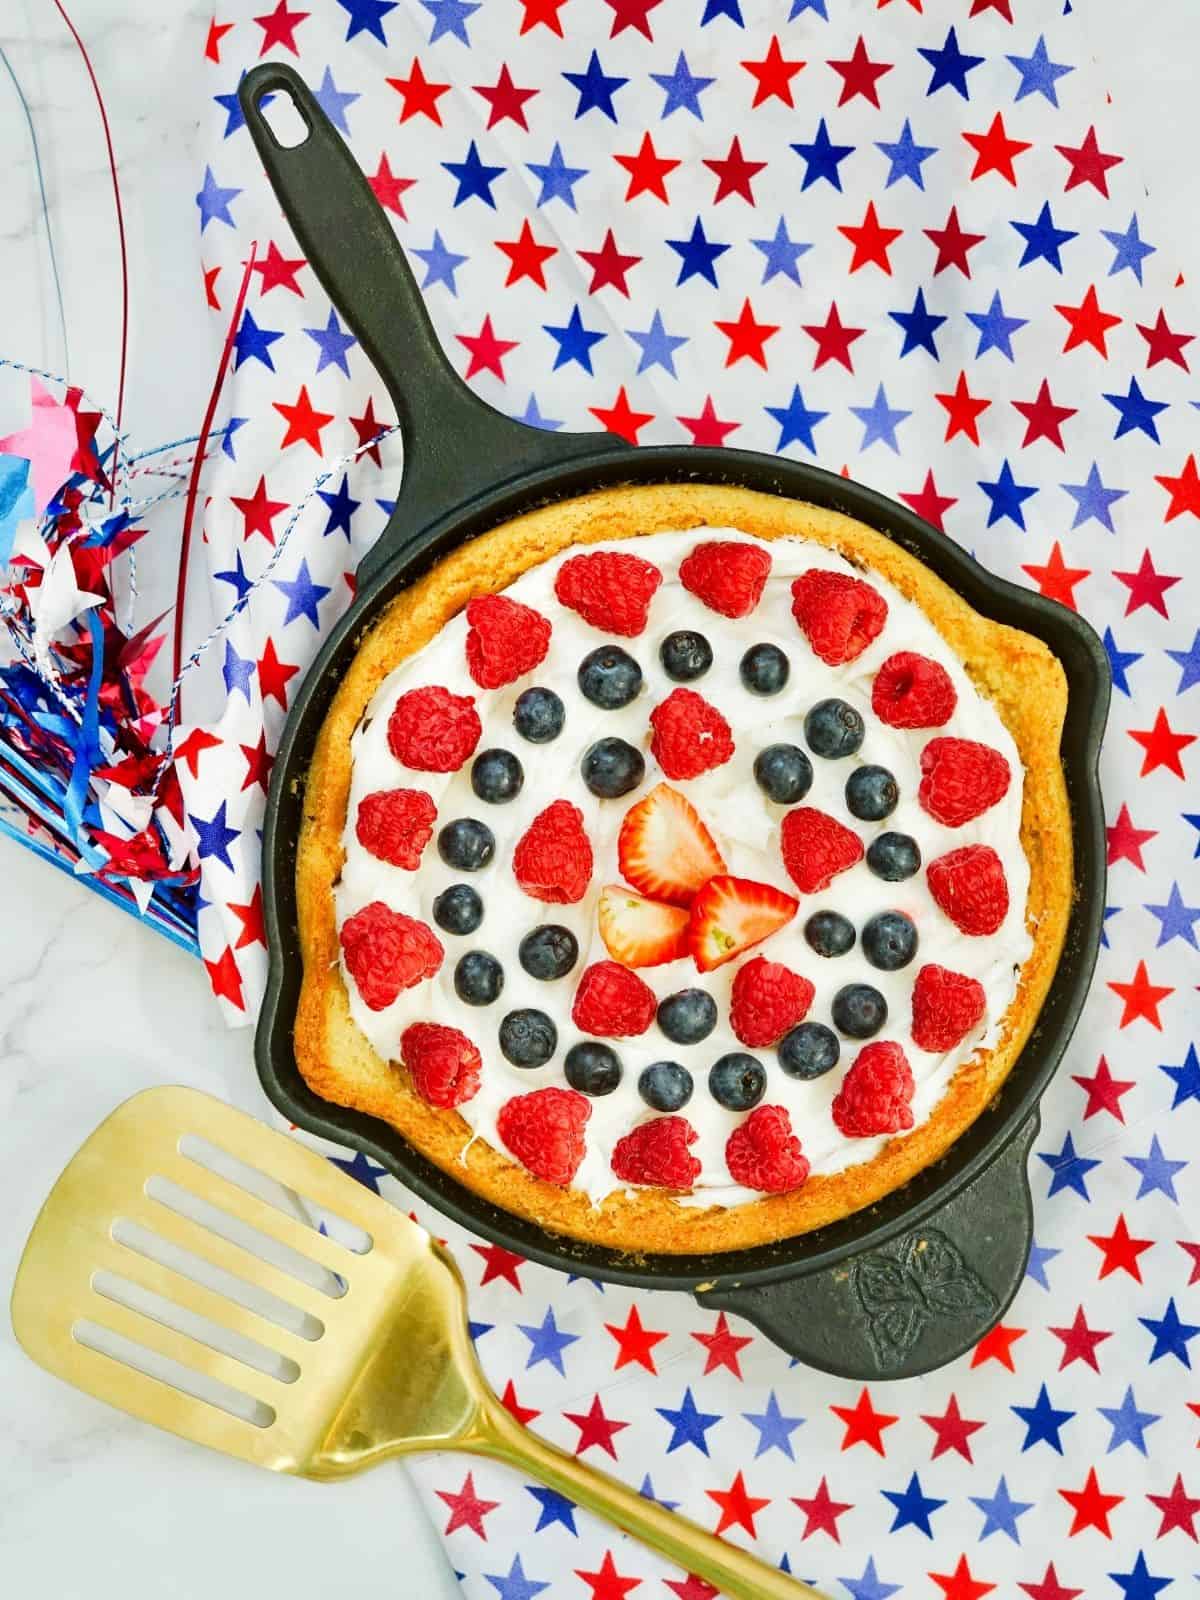 cookie cake in cast iron skillet on towel decorated with stars.